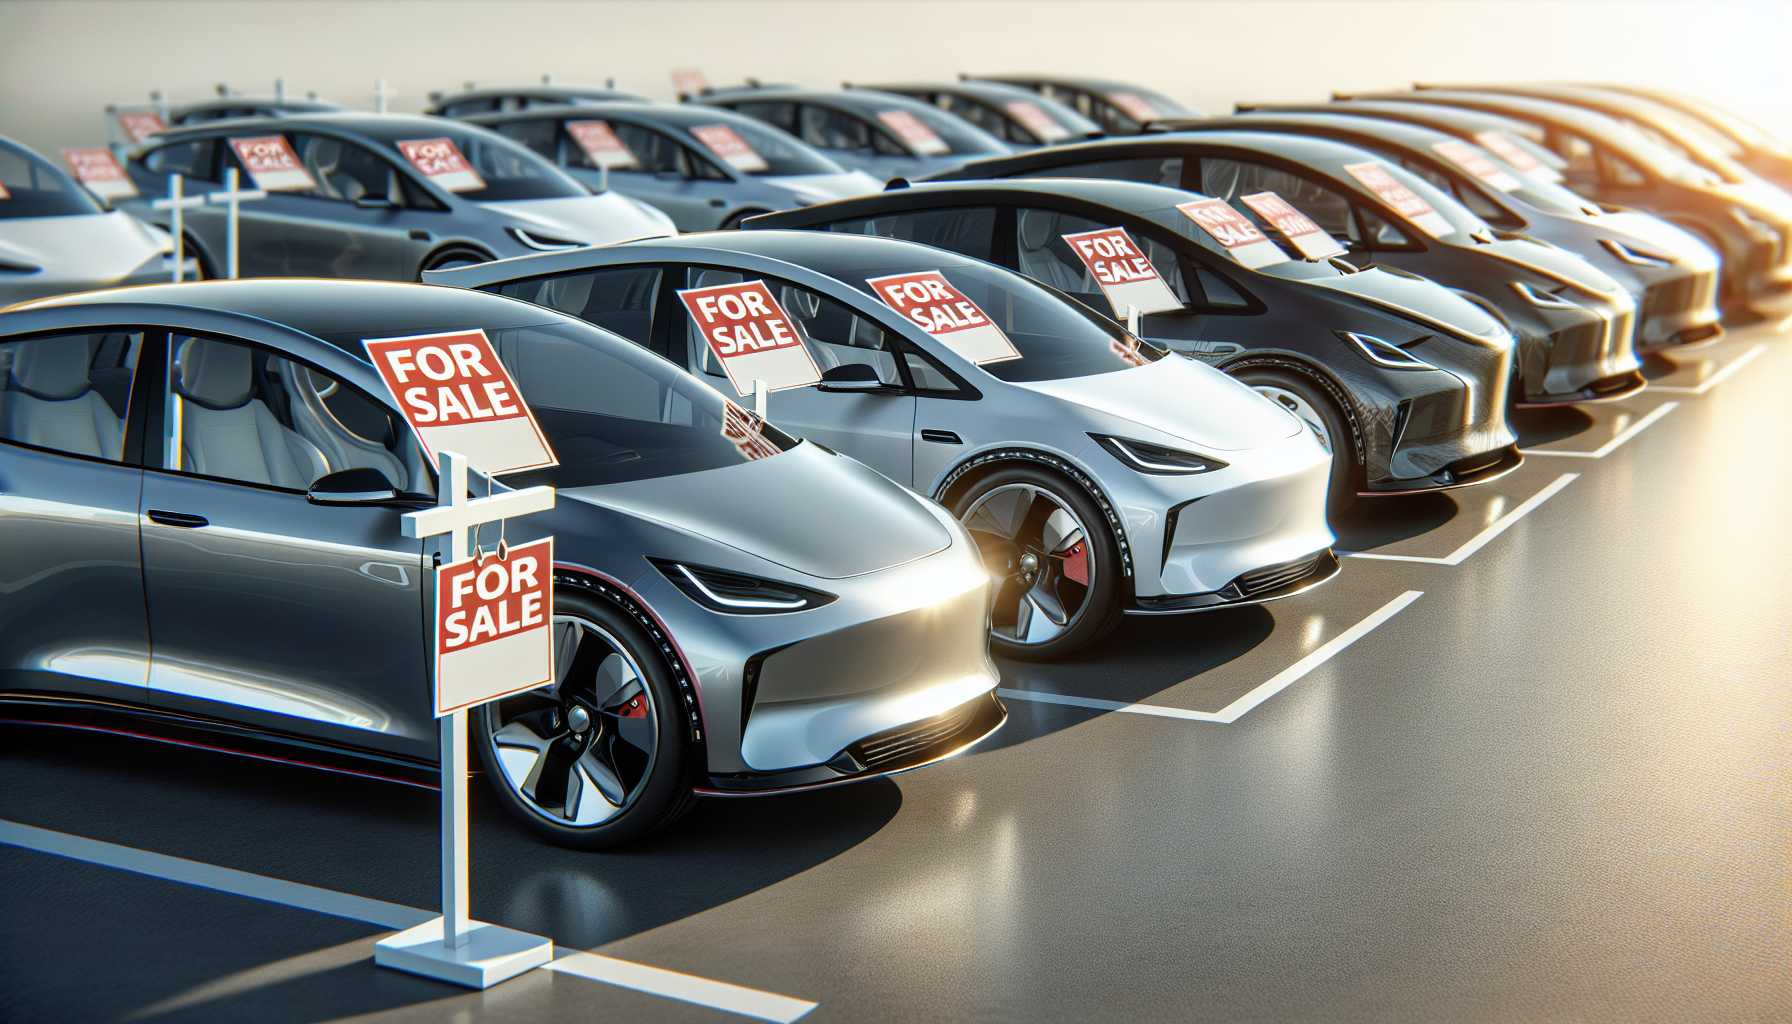 Tesla electric vehicles lined up with 'For Sale' signs indicating price drops and market challenges